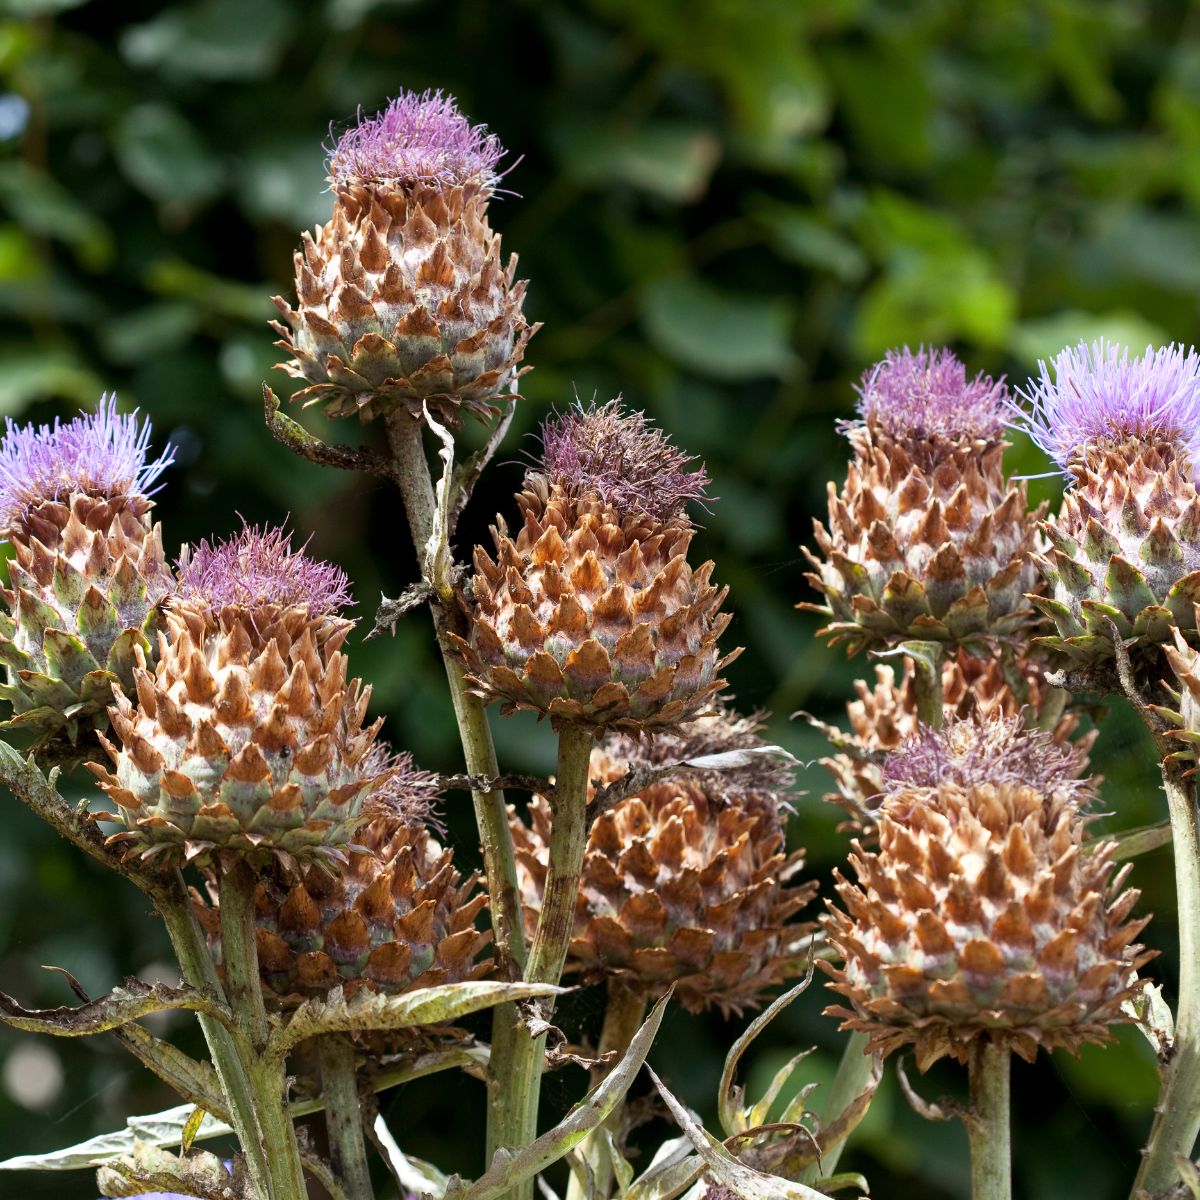 A bunch of artichokes with purple flowers.